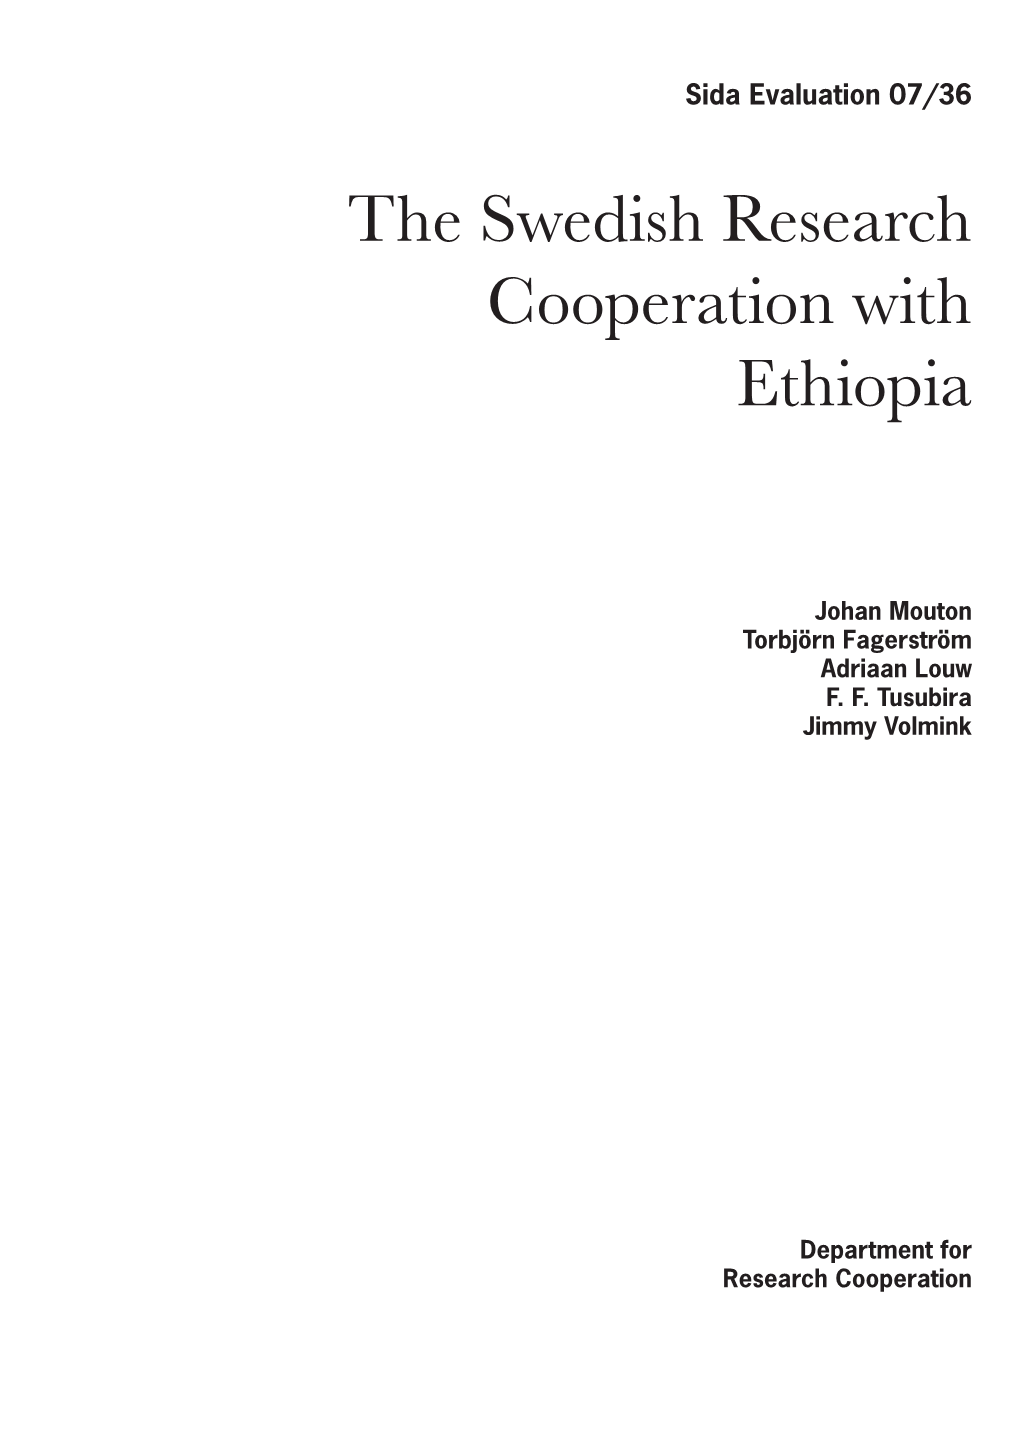 The Swedish Research Cooperation with Ethiopia